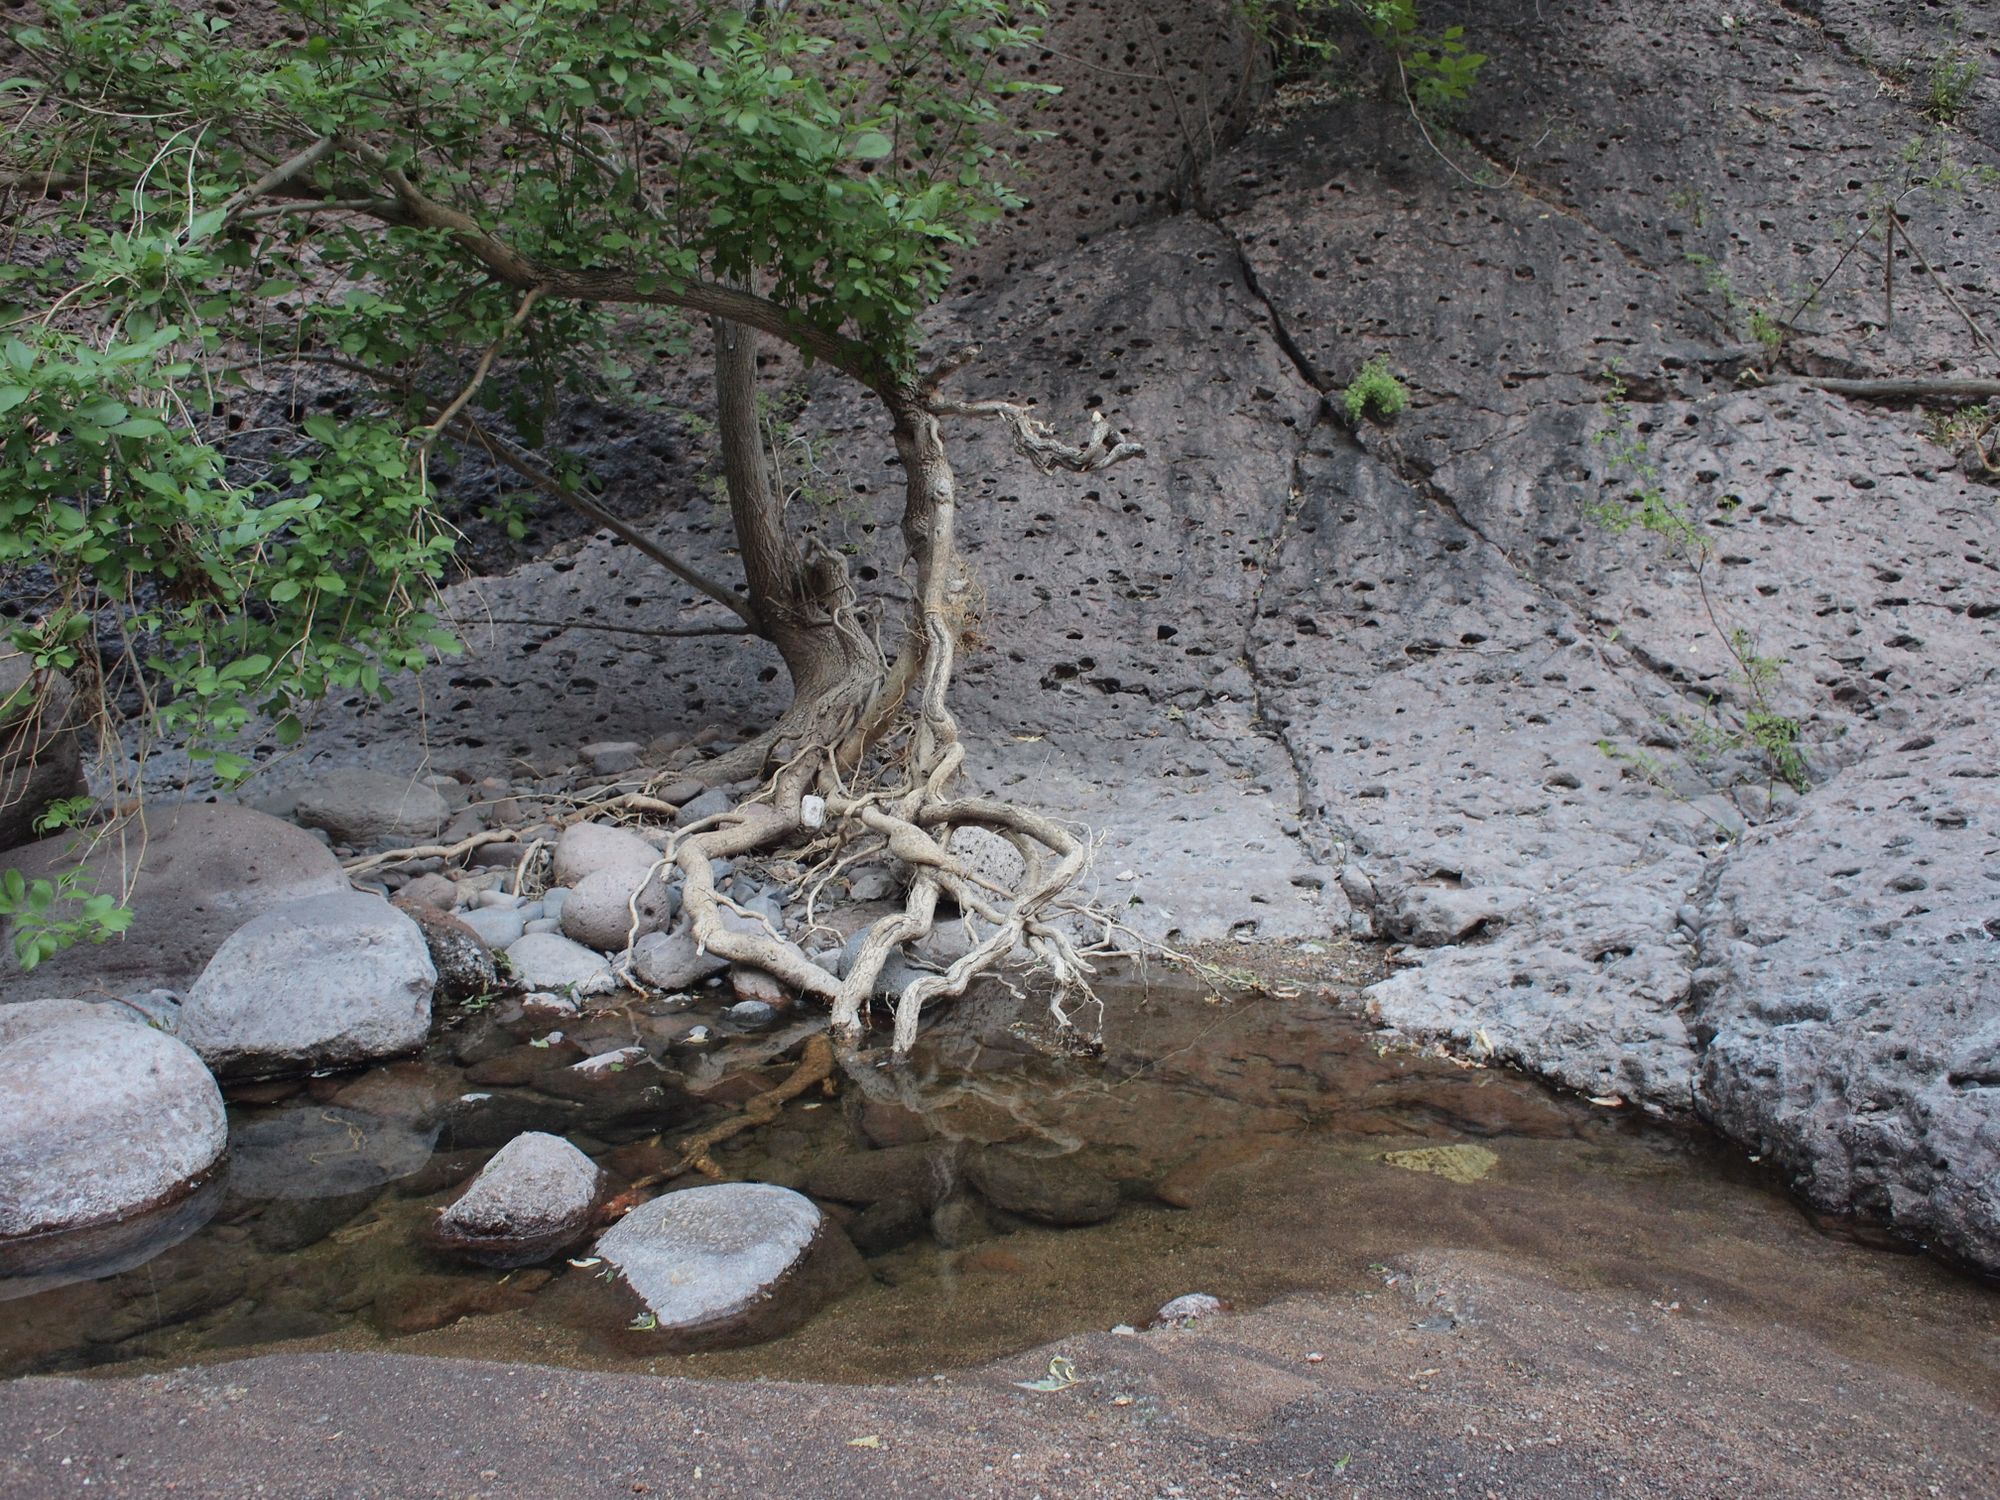 Two trees with a maze of gnarled roots creeping along the grey stone and into a sandy pool of water in a canyon